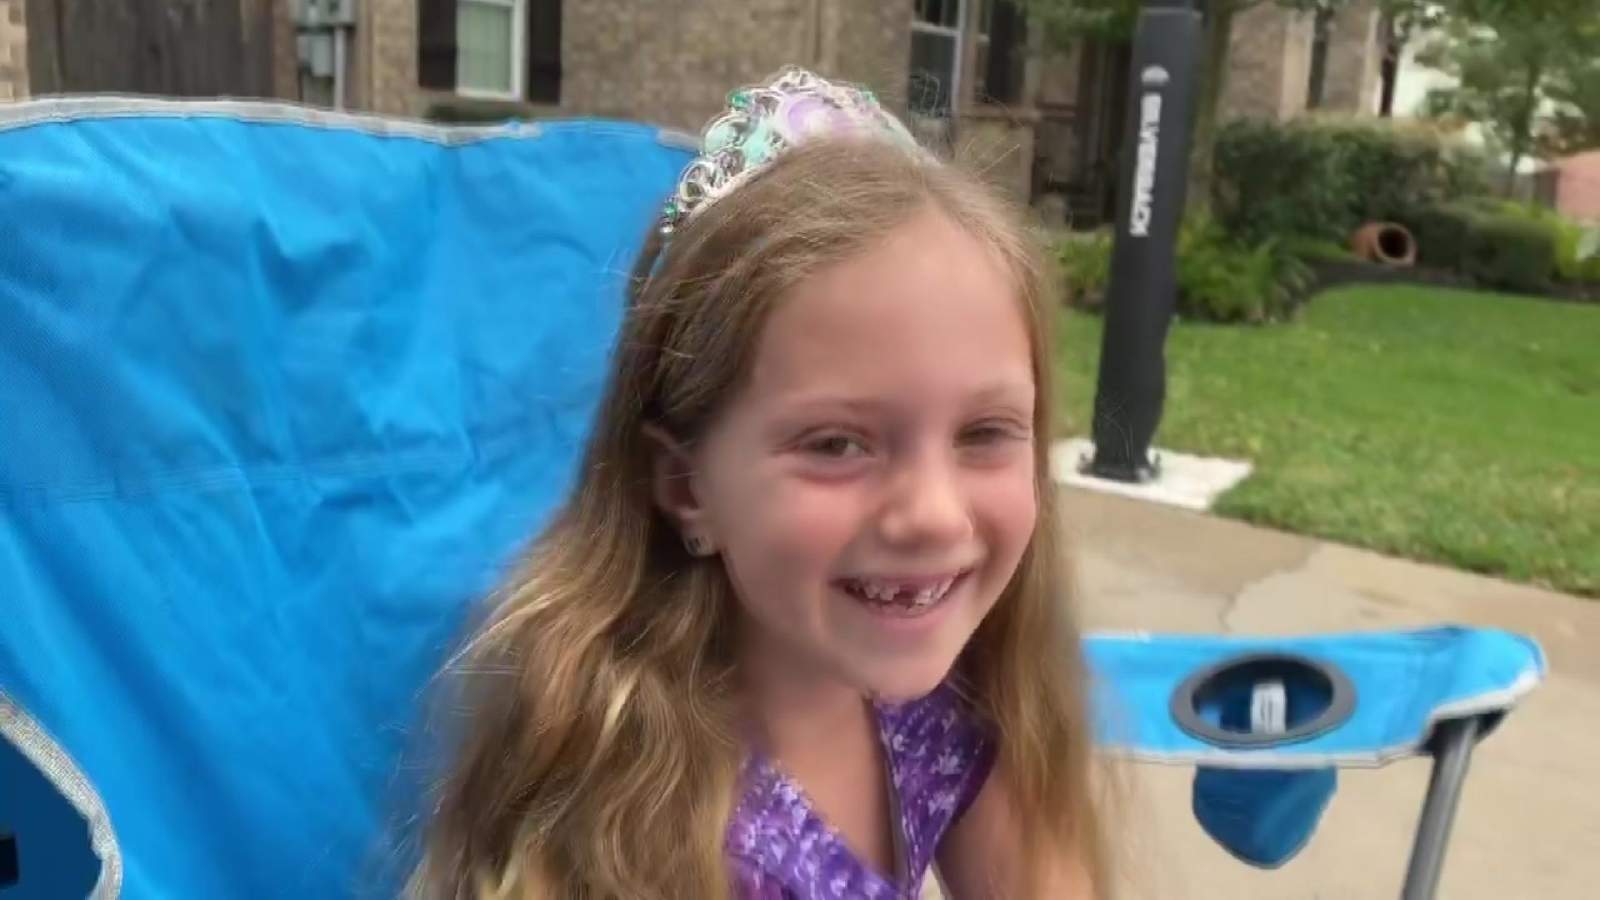 Community hosts surprise parade after 7-year-old’s birthday party was canceled due to social distancing